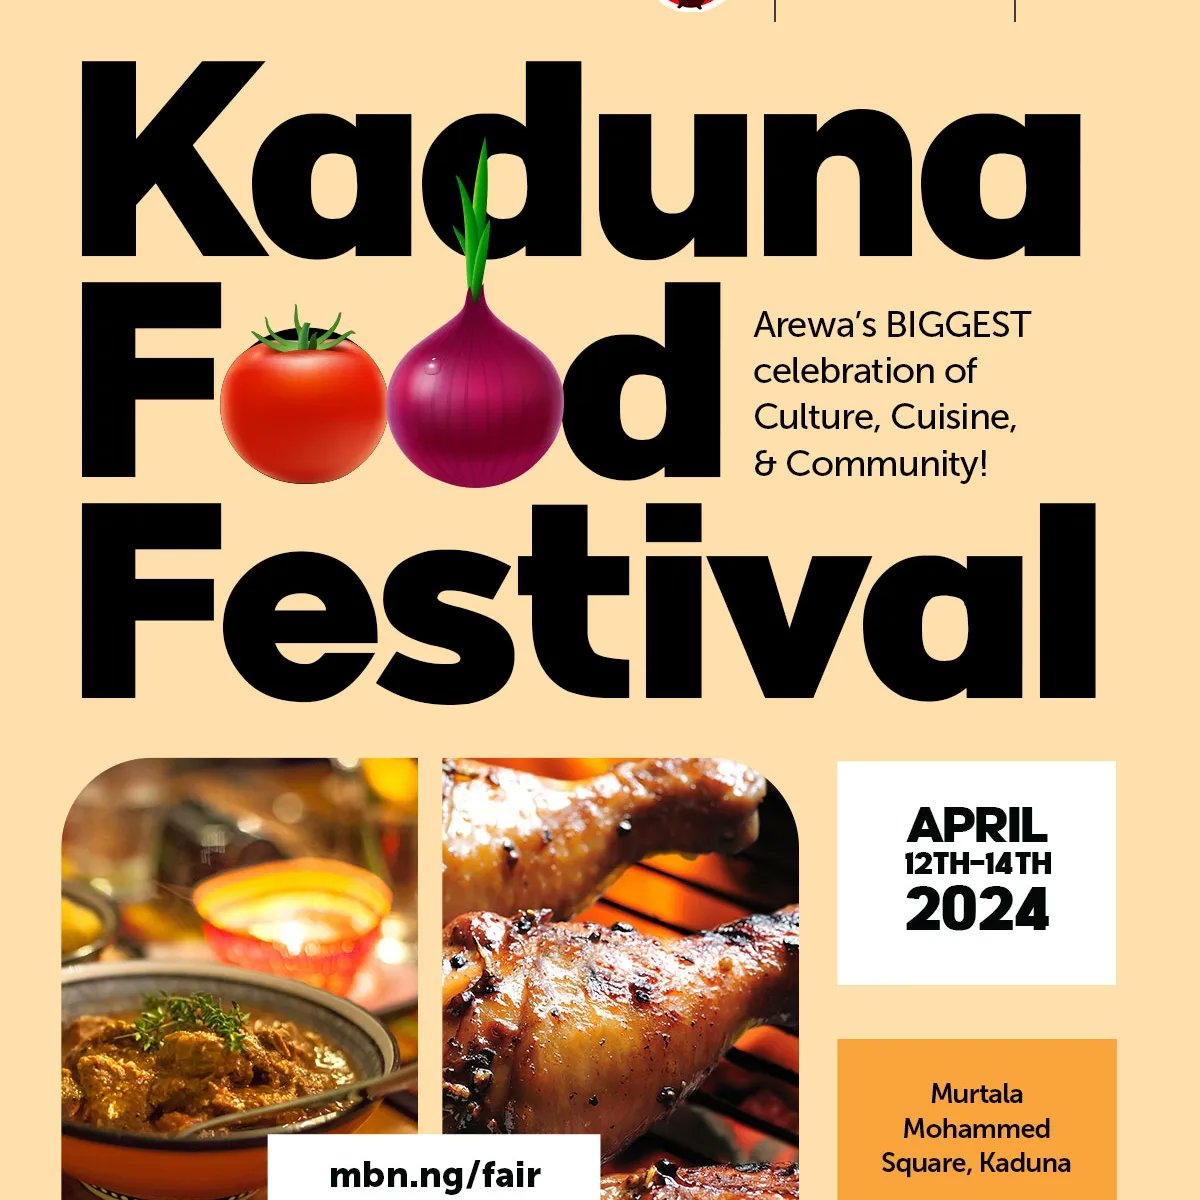 We are excited to unveil our first lineup of artistes who will be performing at the Kaduna Food Festival. Get ready to be serenaded by Jordan Bangoji, Tisan and Kairat Abdullahi as you indulge in delicious culinary delights. #kadunafoodfestival @kadunafoodfest @mbn_hq